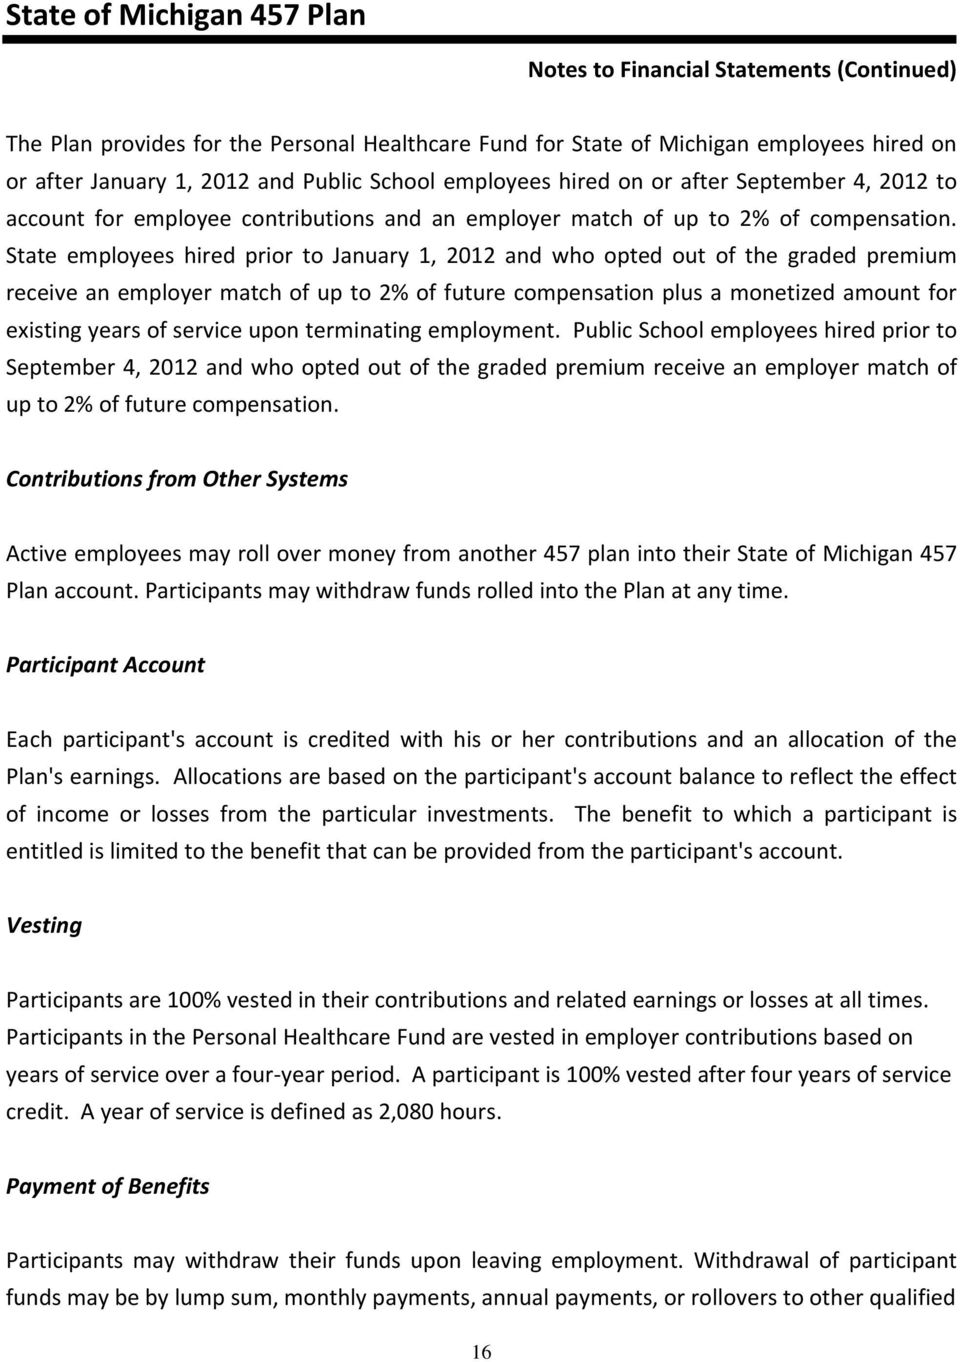 State employees hired prior to January 1, 2012 and who opted out of the graded premium receive an employer match of up to 2% of future compensation plus a monetized amount for existing years of